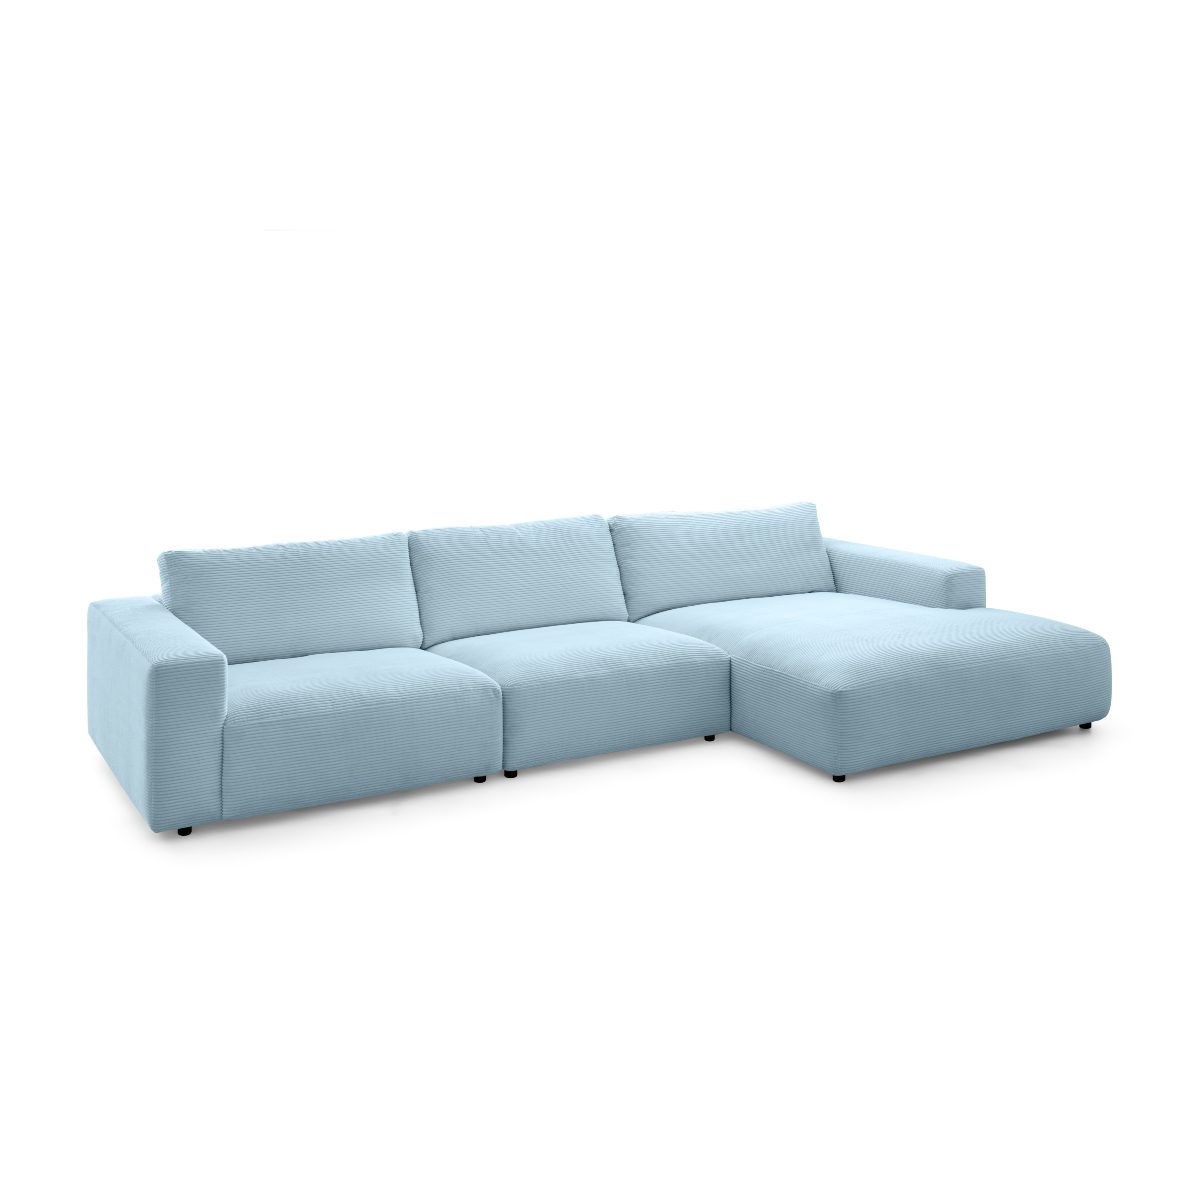 Gallery M branded by 3,5 Cord Sitzer Lucia Musterring Sofa